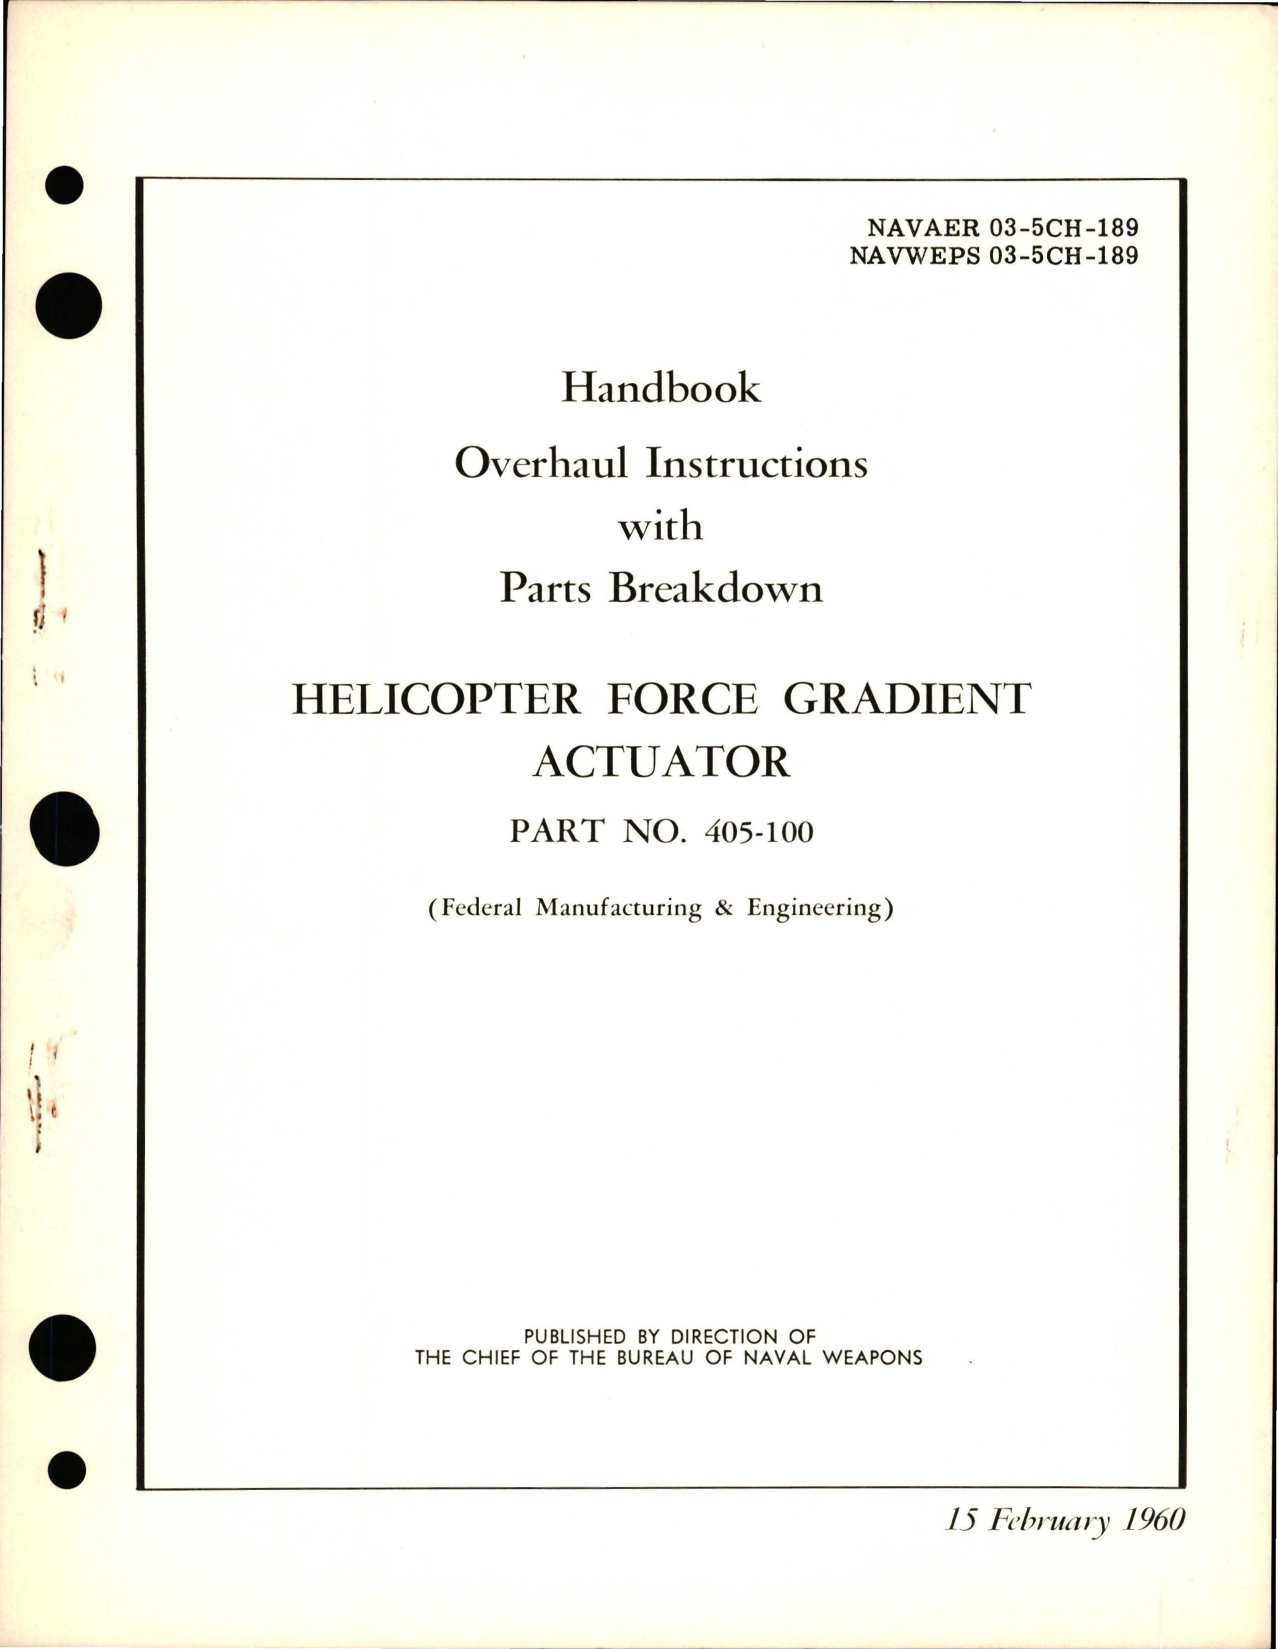 Sample page 1 from AirCorps Library document: Overhaul Instructions with Parts Breakdown for Helicopter Force Gradient Actuator - Part 405-100